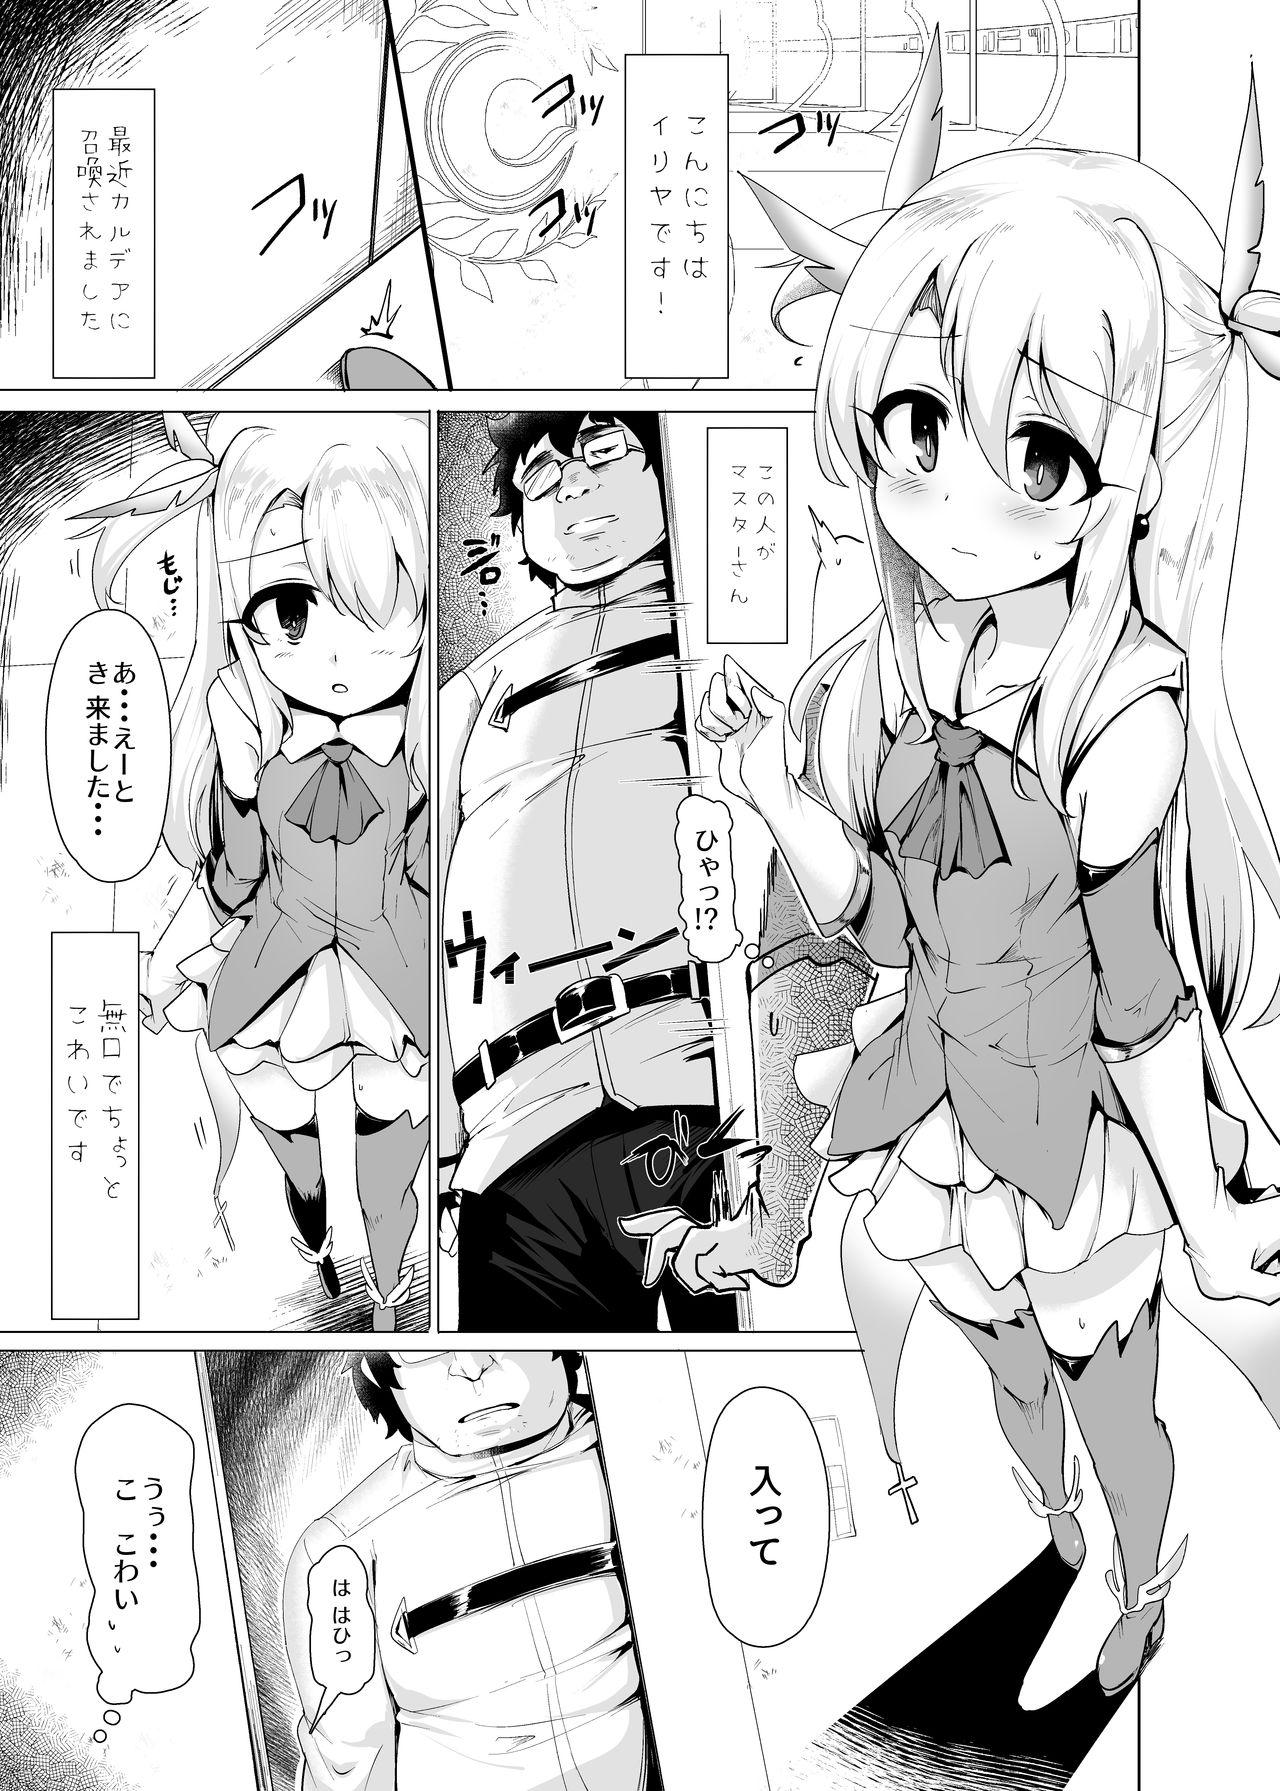 Older Mahou Shoujo to Asobou - Fate grand order Pervs - Page 2